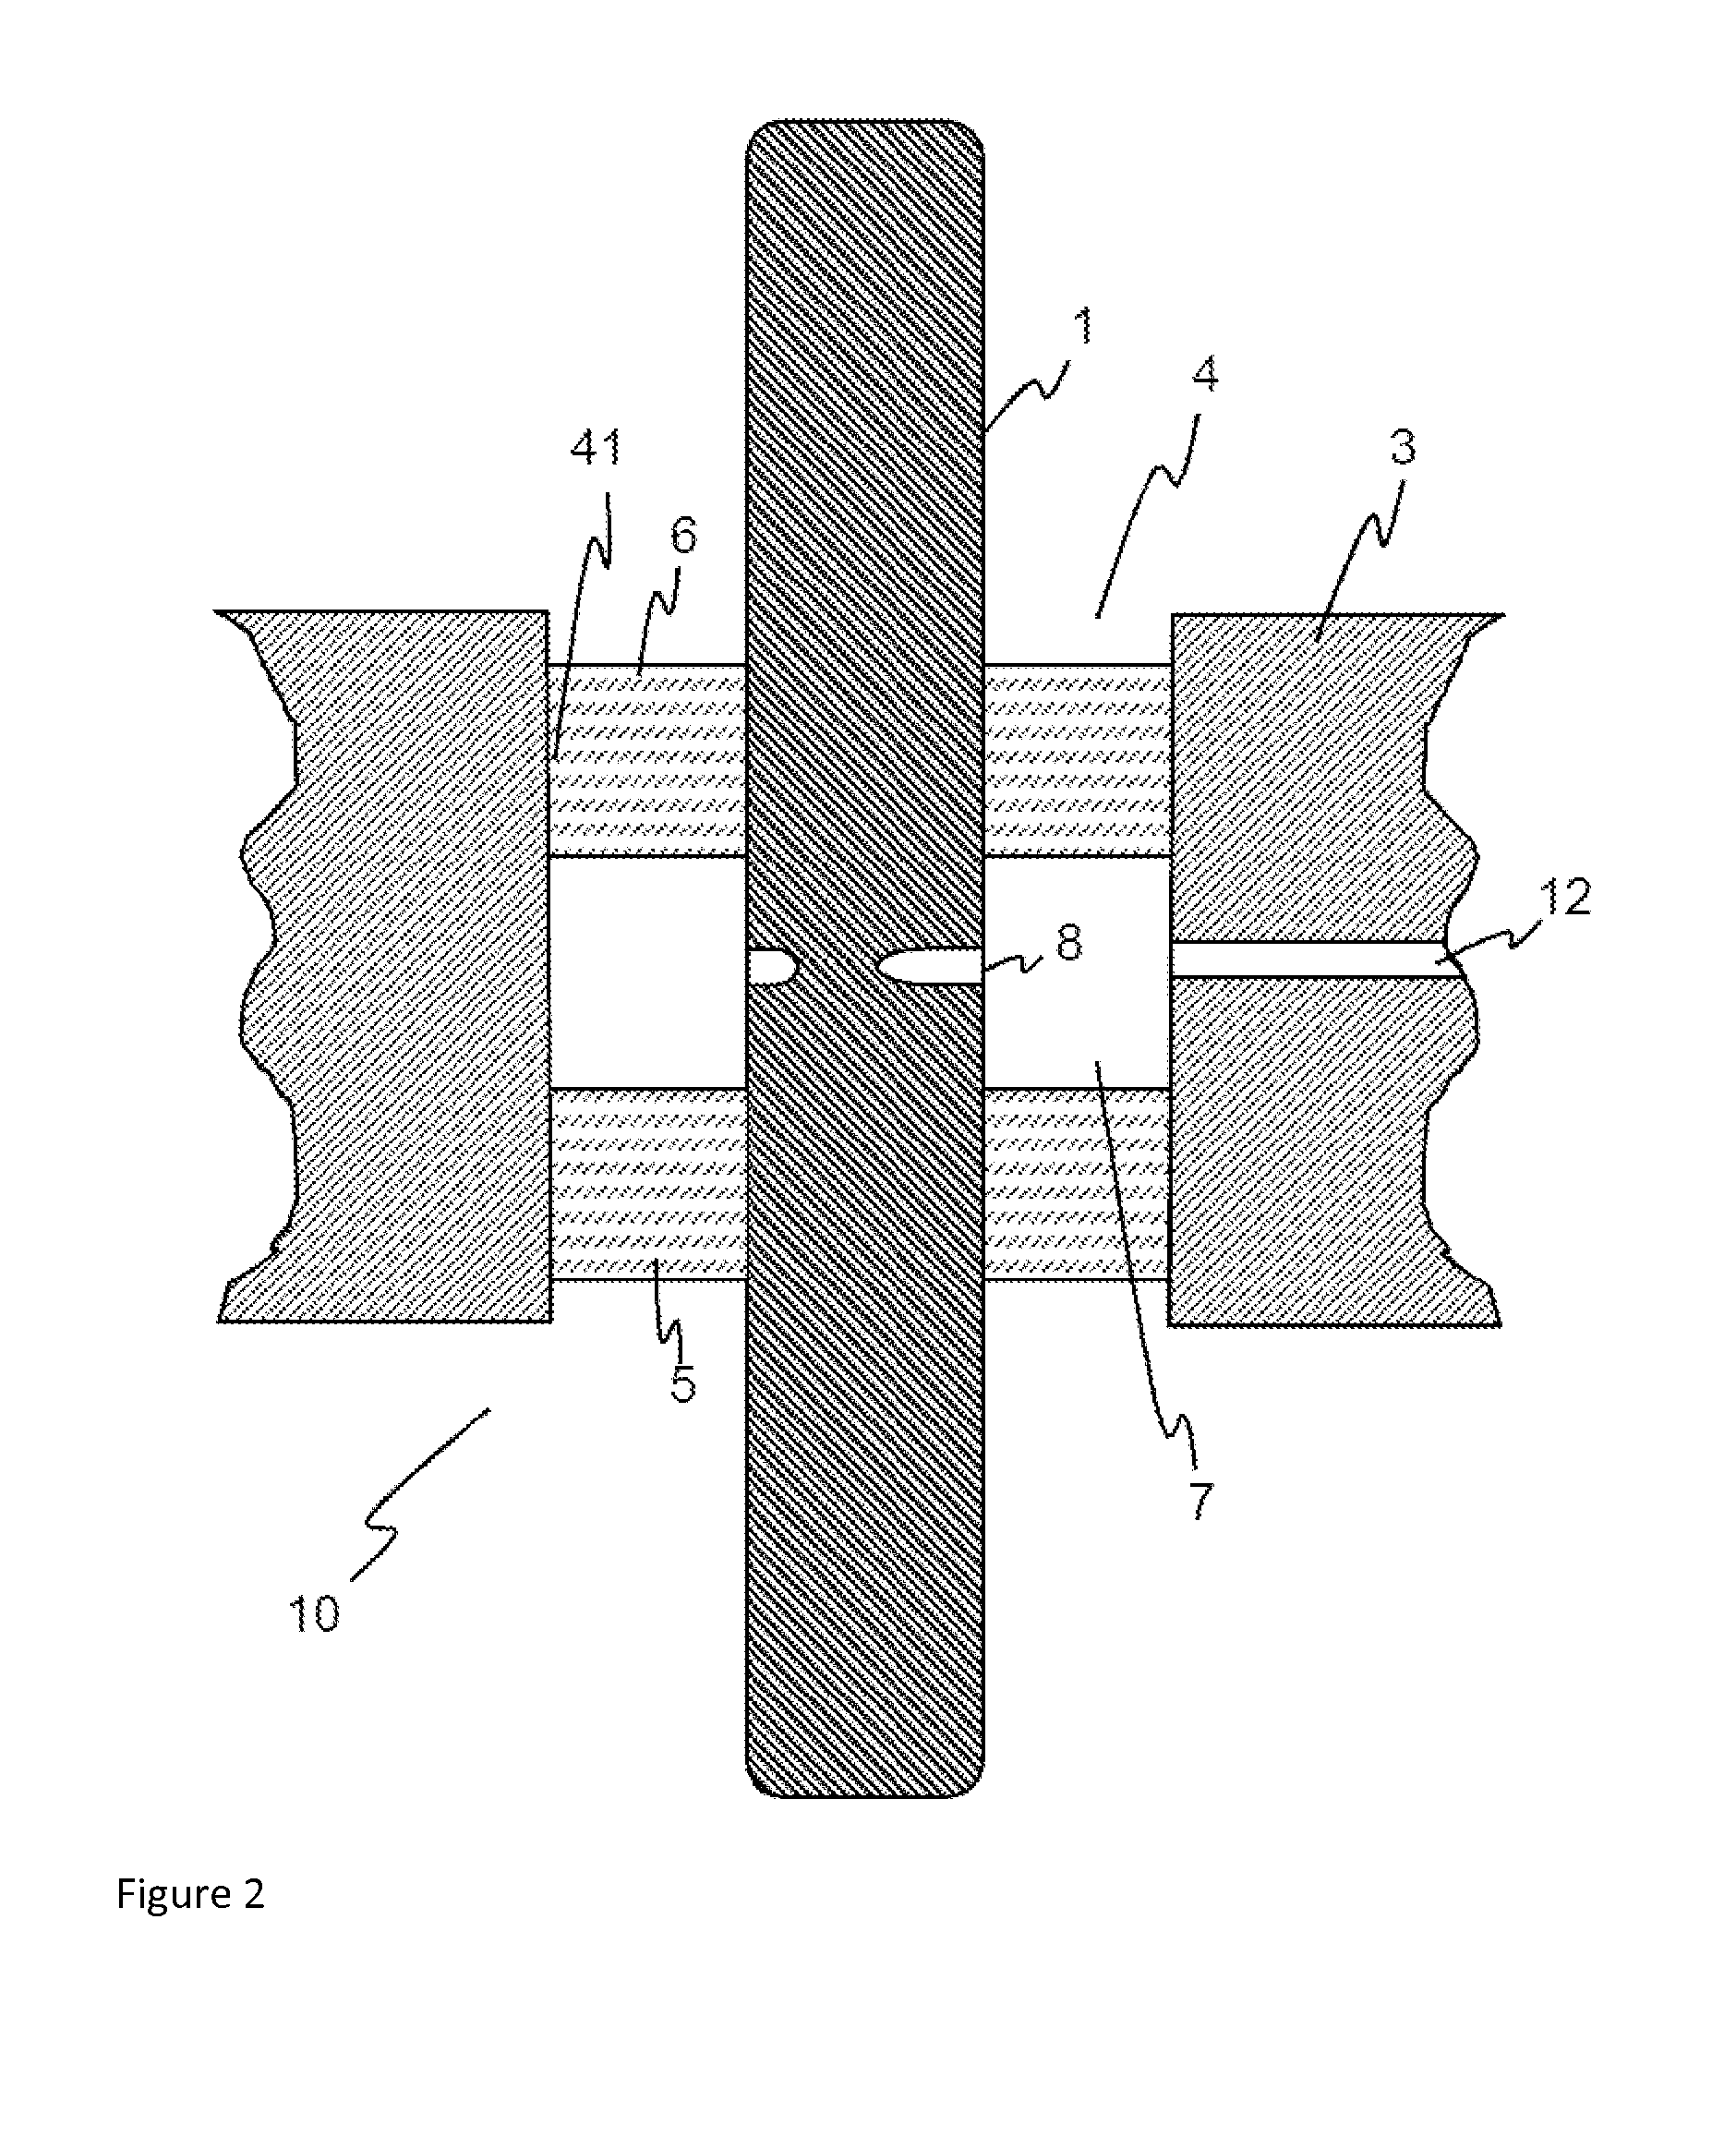 Fault-proof feed-through device